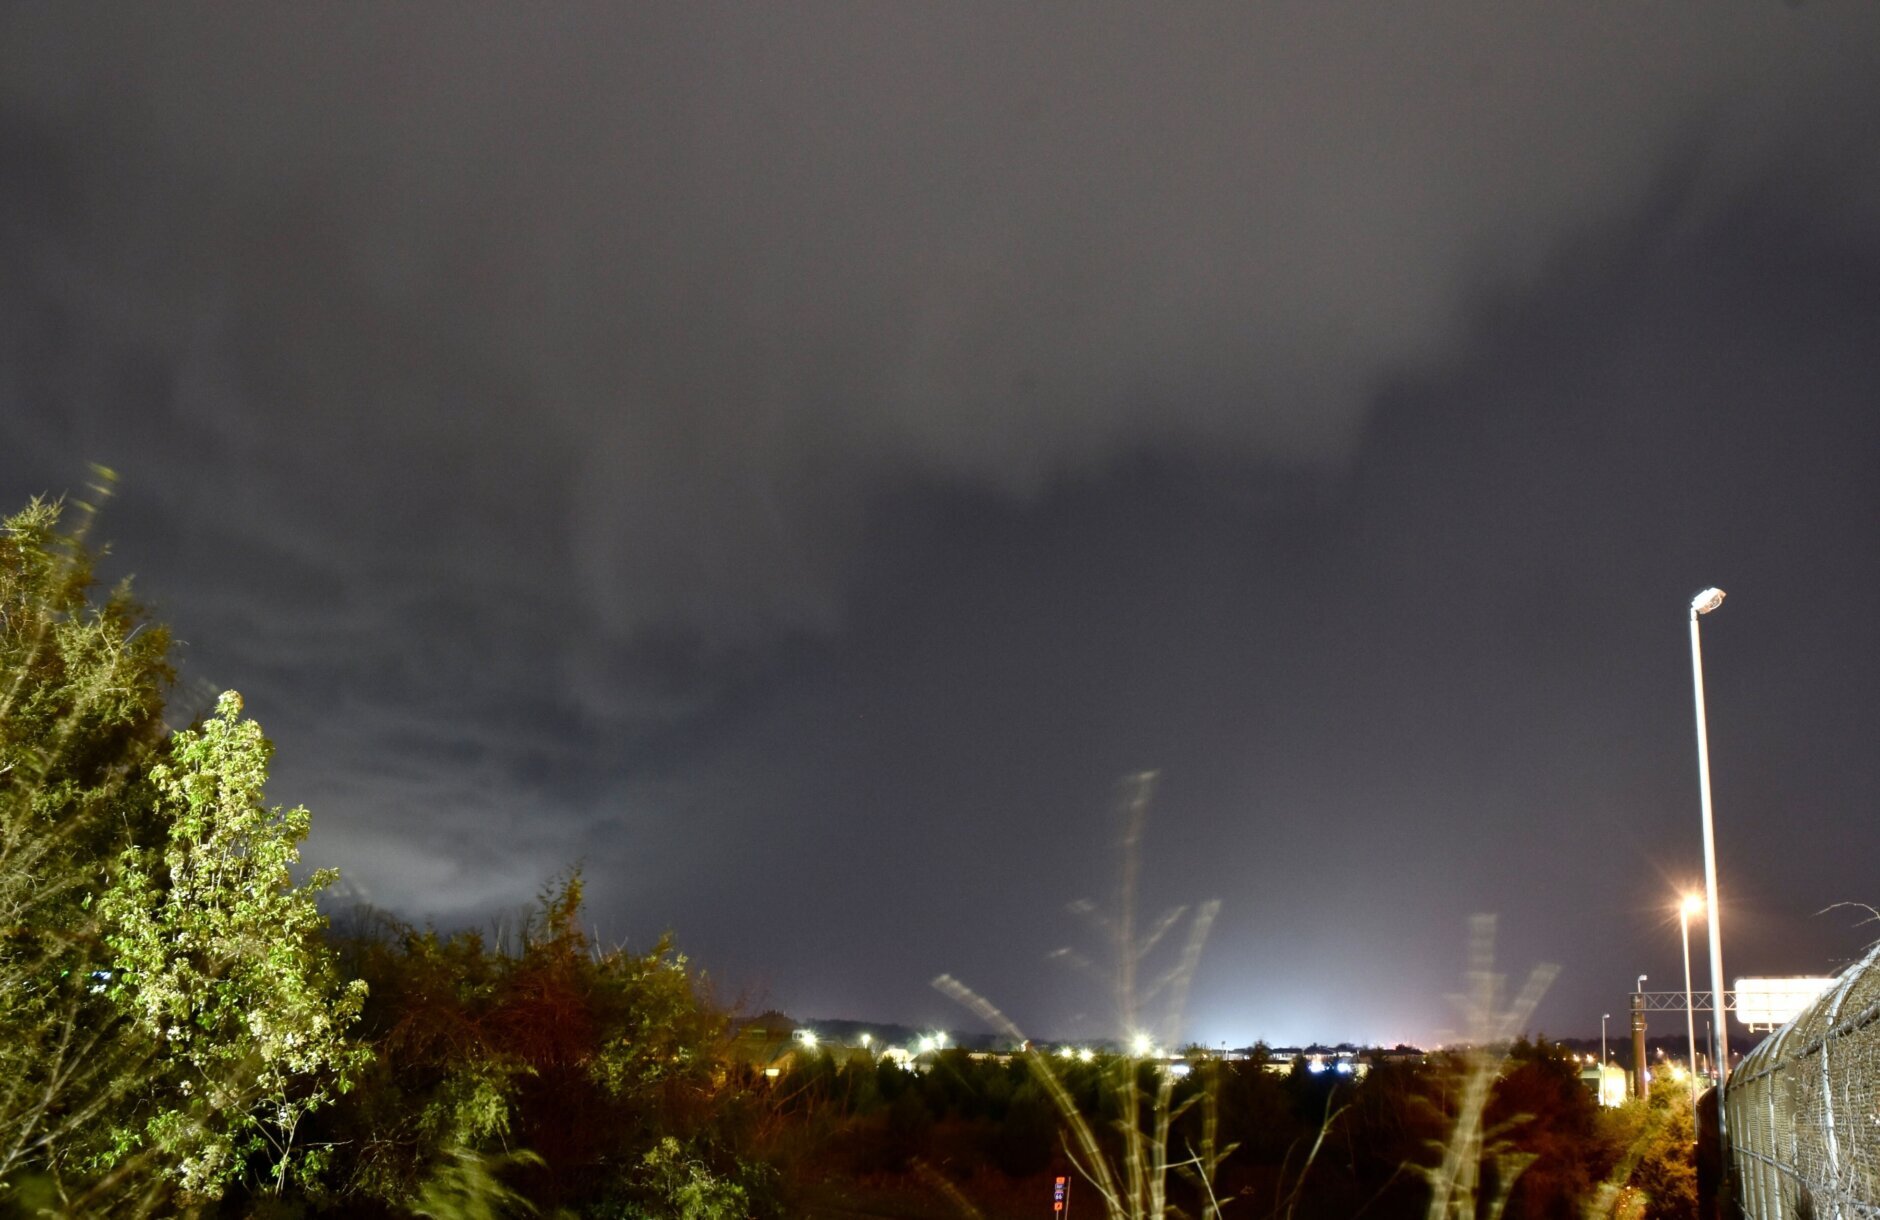 <p>A view of the storm in Centreville, Virginia, around 8:20 p.m. Thursday around the time a tornado warning was issued. (WTOP/Dave Dildine)</p>
